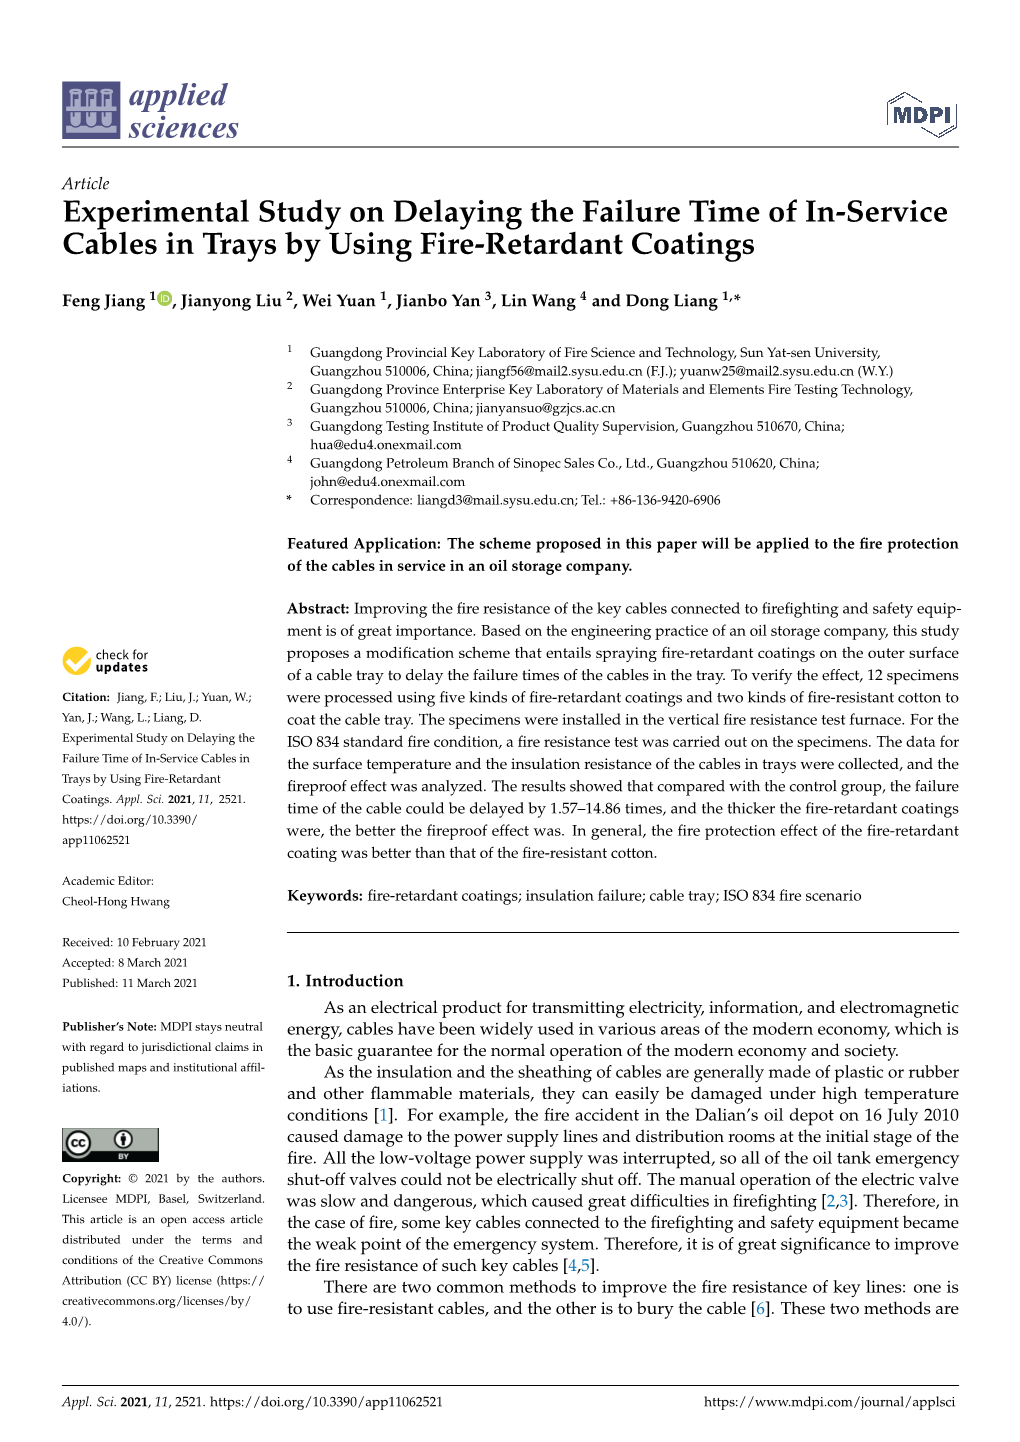 Experimental Study on Delaying the Failure Time of In-Service Cables in Trays by Using Fire-Retardant Coatings